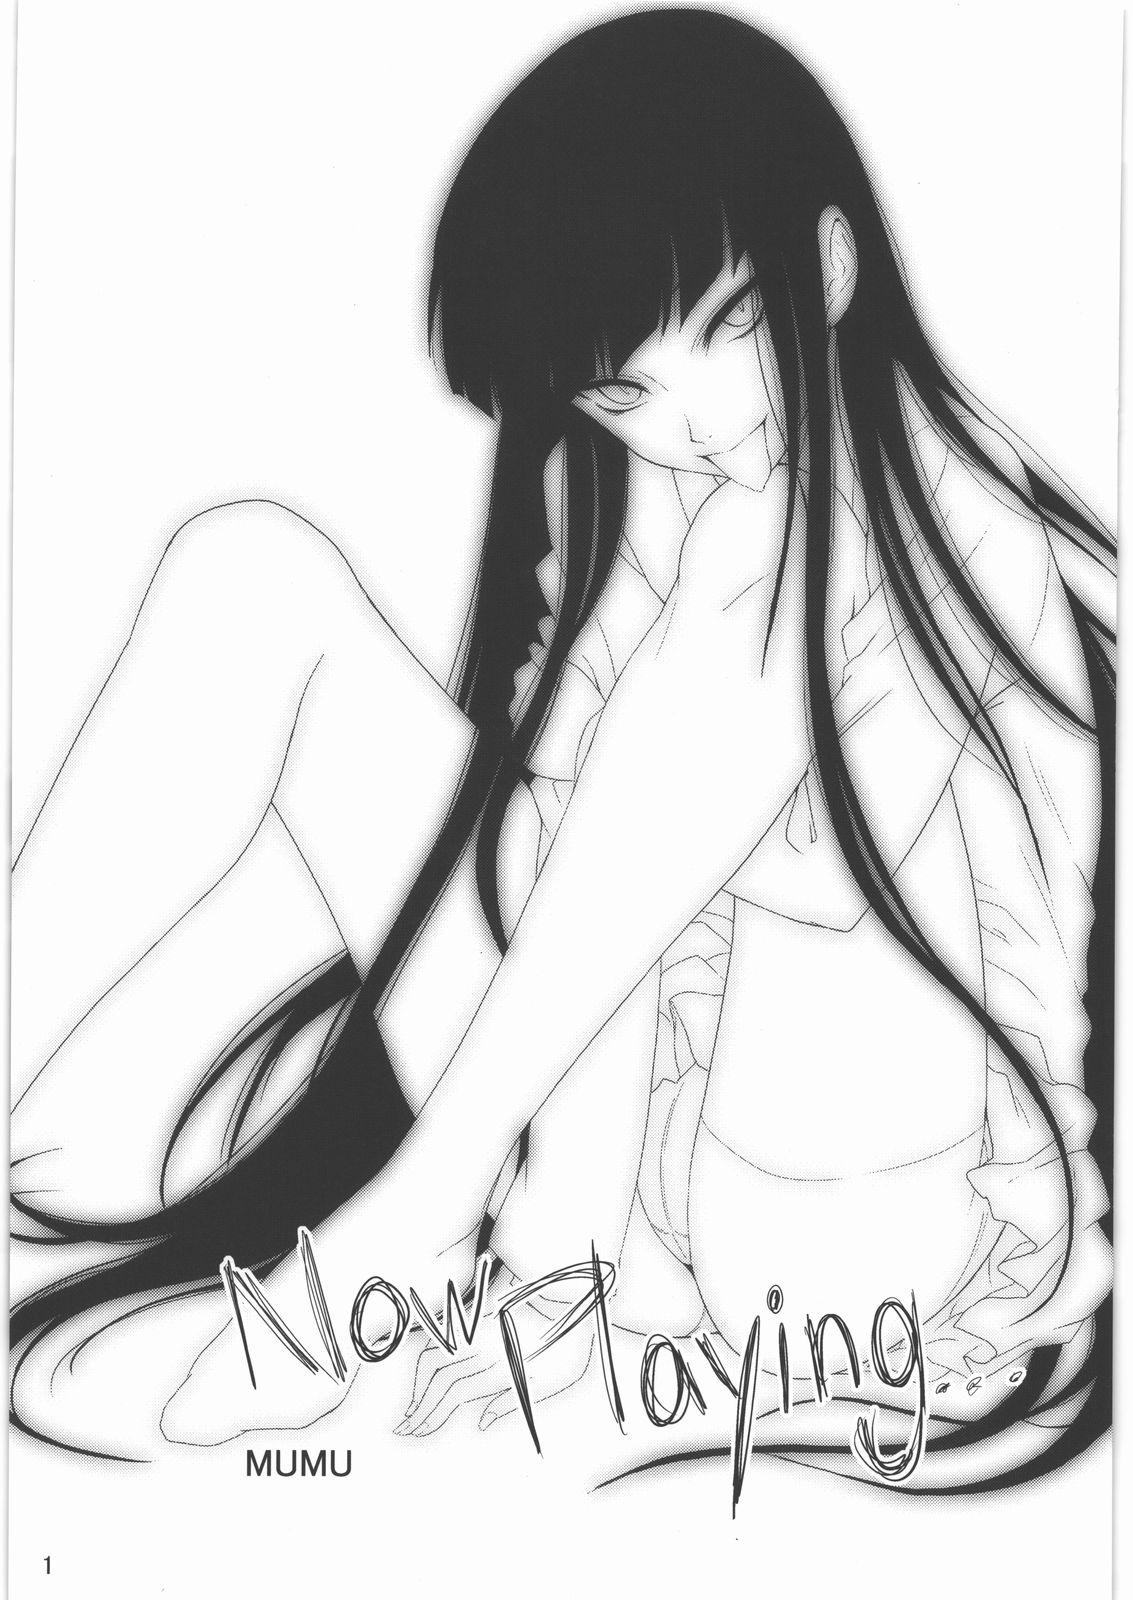 Long Hair Now Playing... - Houkago play Teensex - Page 2